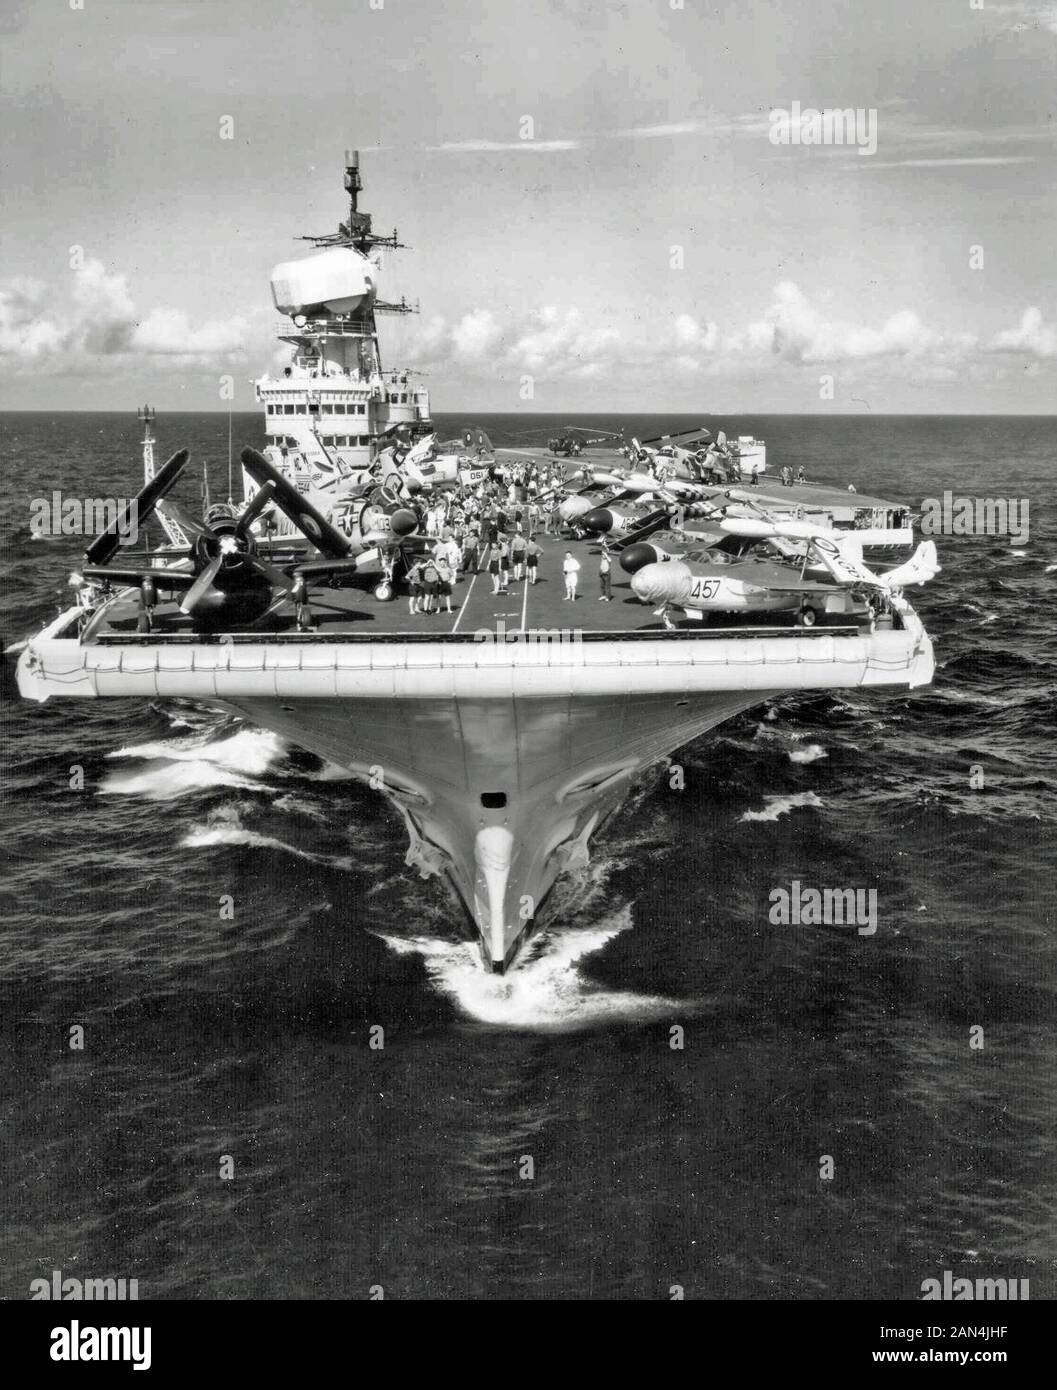 Bow view of the British Royal Navy aircraft carrier HMS Victorious (R38) operating off Norfolk, Virginia (USA), between 15 and 20 July 1959. On deck are several planes of Victorious´ air group: a Douglas Skyraider AEW.1 of 849 Naval Air Squadron, five de Havilland Sea Venom fighters of 893 NAS, two Supermarine Scimtar fighters of 803 NAS, and a Westland Dragnonfly HR.5 of Ships Flight 1 (Search and Rescue). Also on deck are serveral U.S. Navy aircraft (starboard bow): A McDonnell F3H-2 Demon of Fighter Squadron 31 (VF-31) 'Tomcatters', and a barely visible Vought F8U-1E Crusader (BuNo 145544) Stock Photo